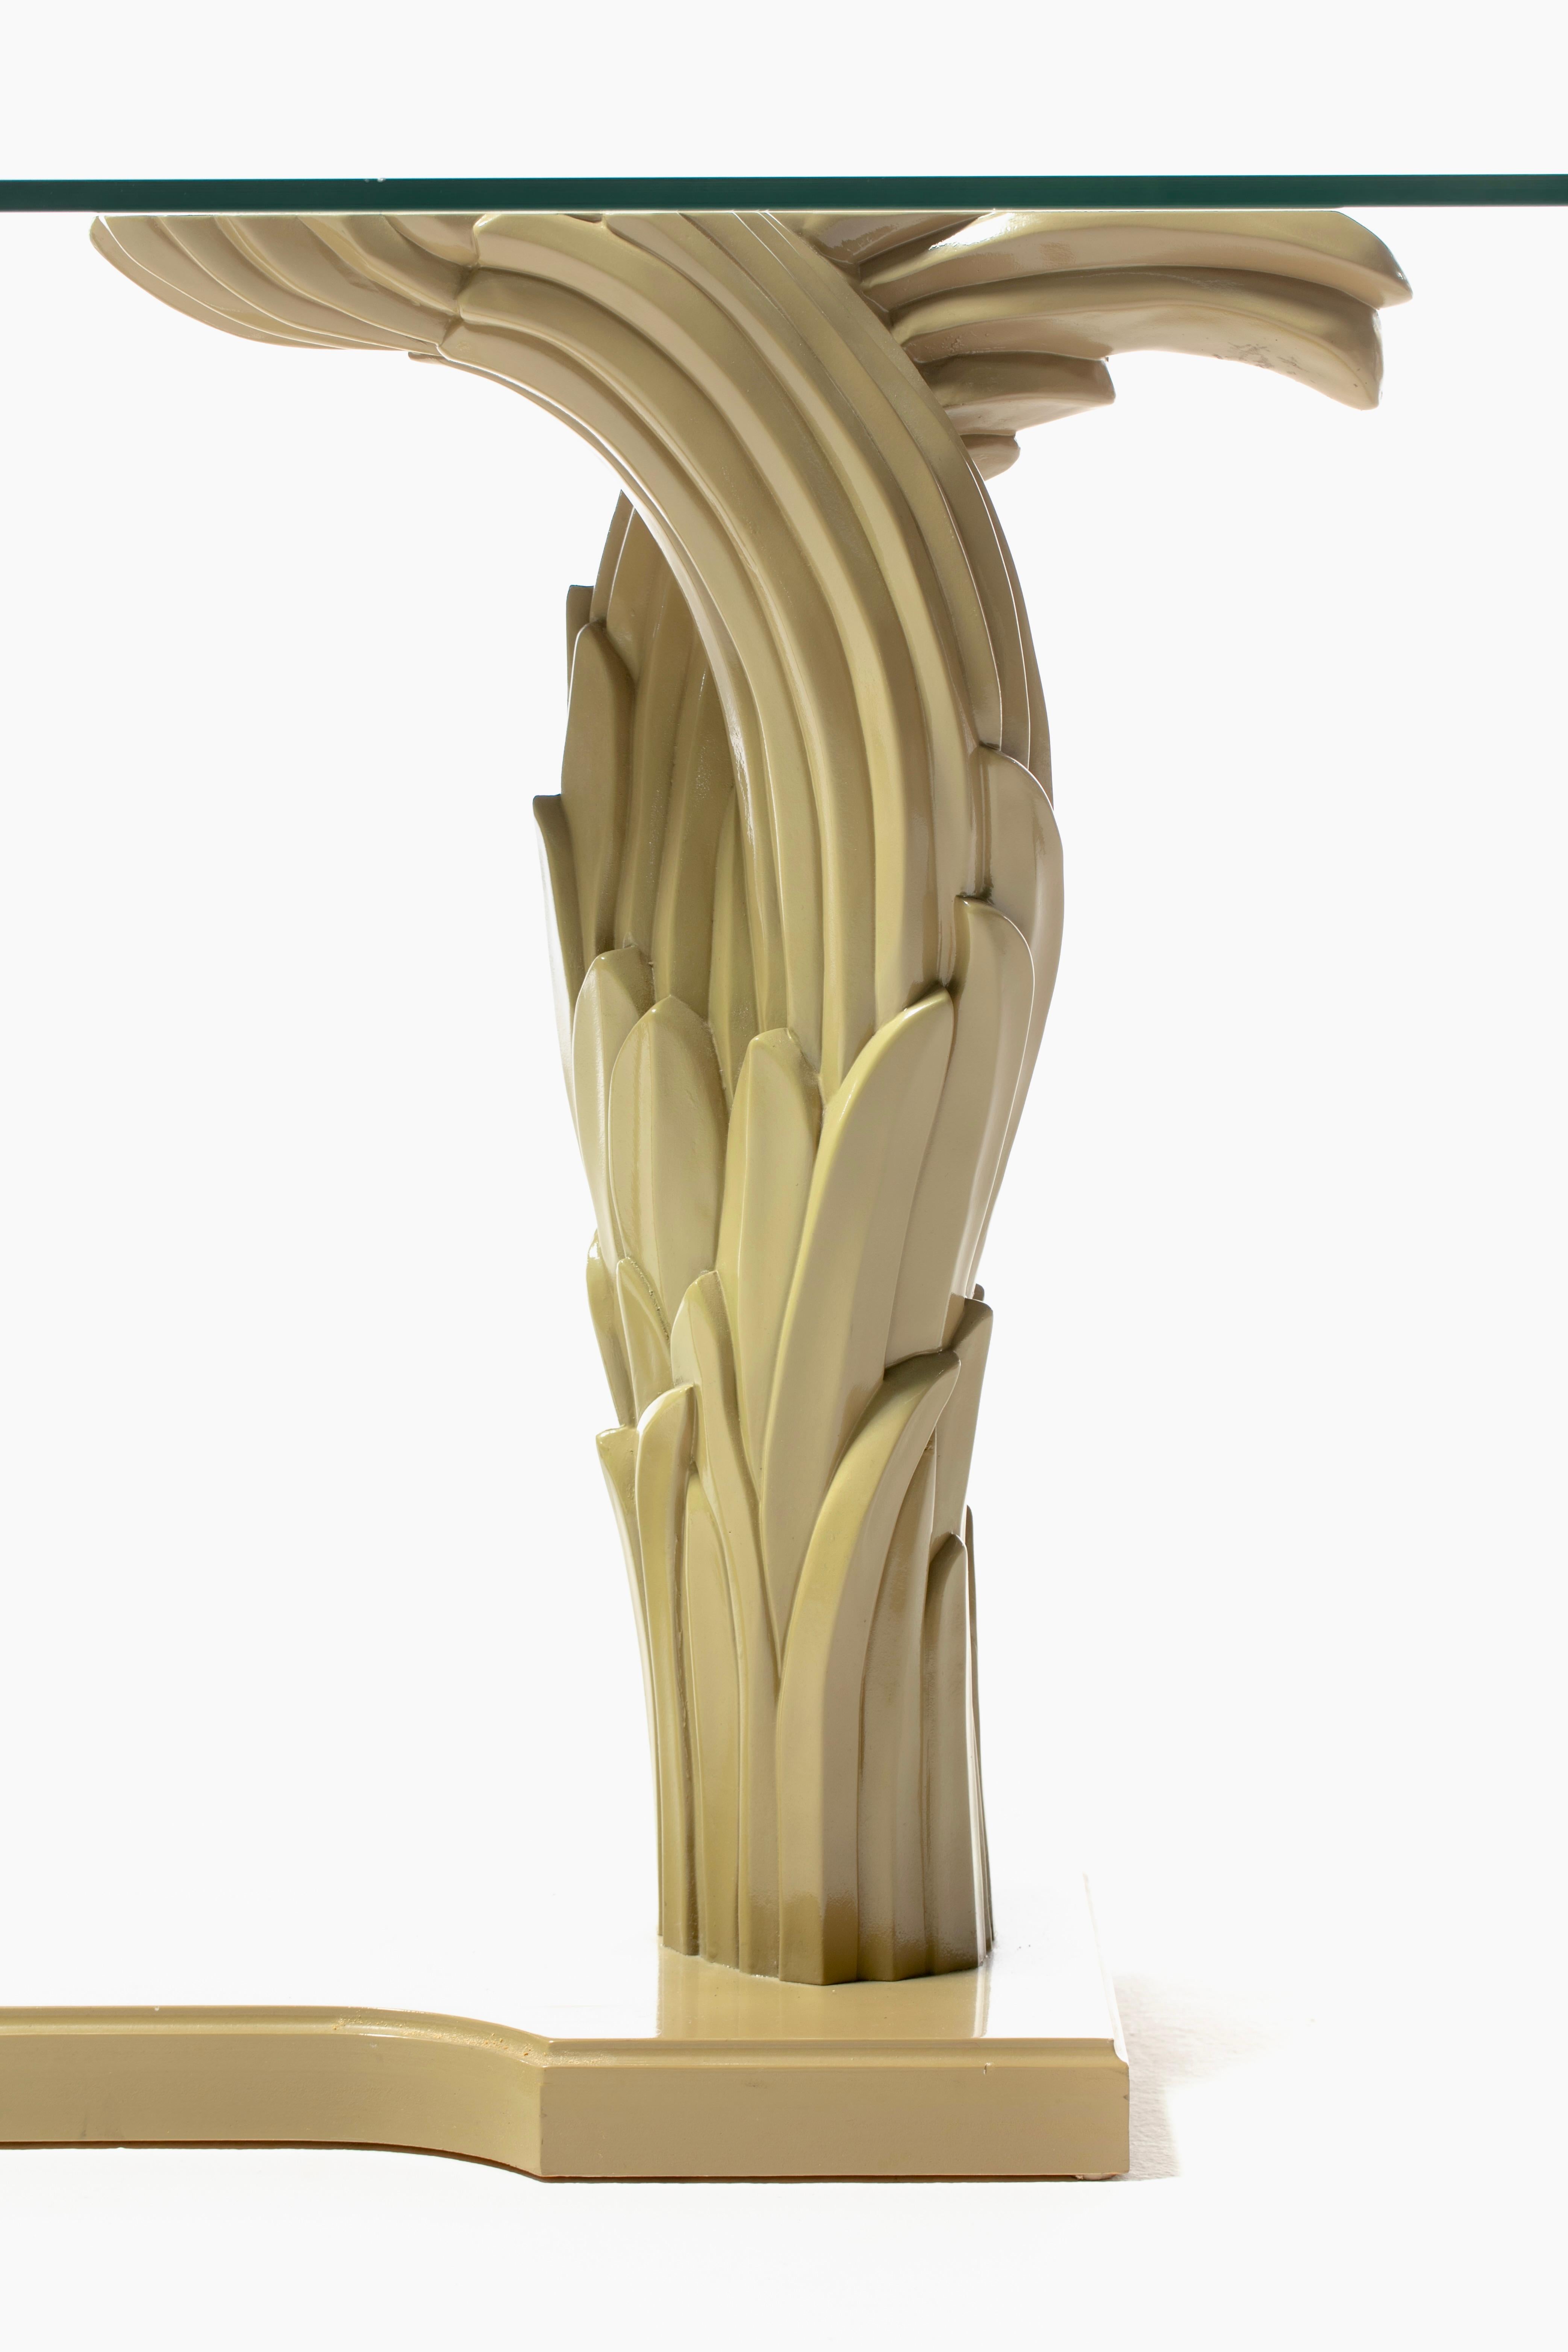 Art Deco Serge Roche Style Palm Leaf Console Lacquered in Almond Latte c. 1980 For Sale 8